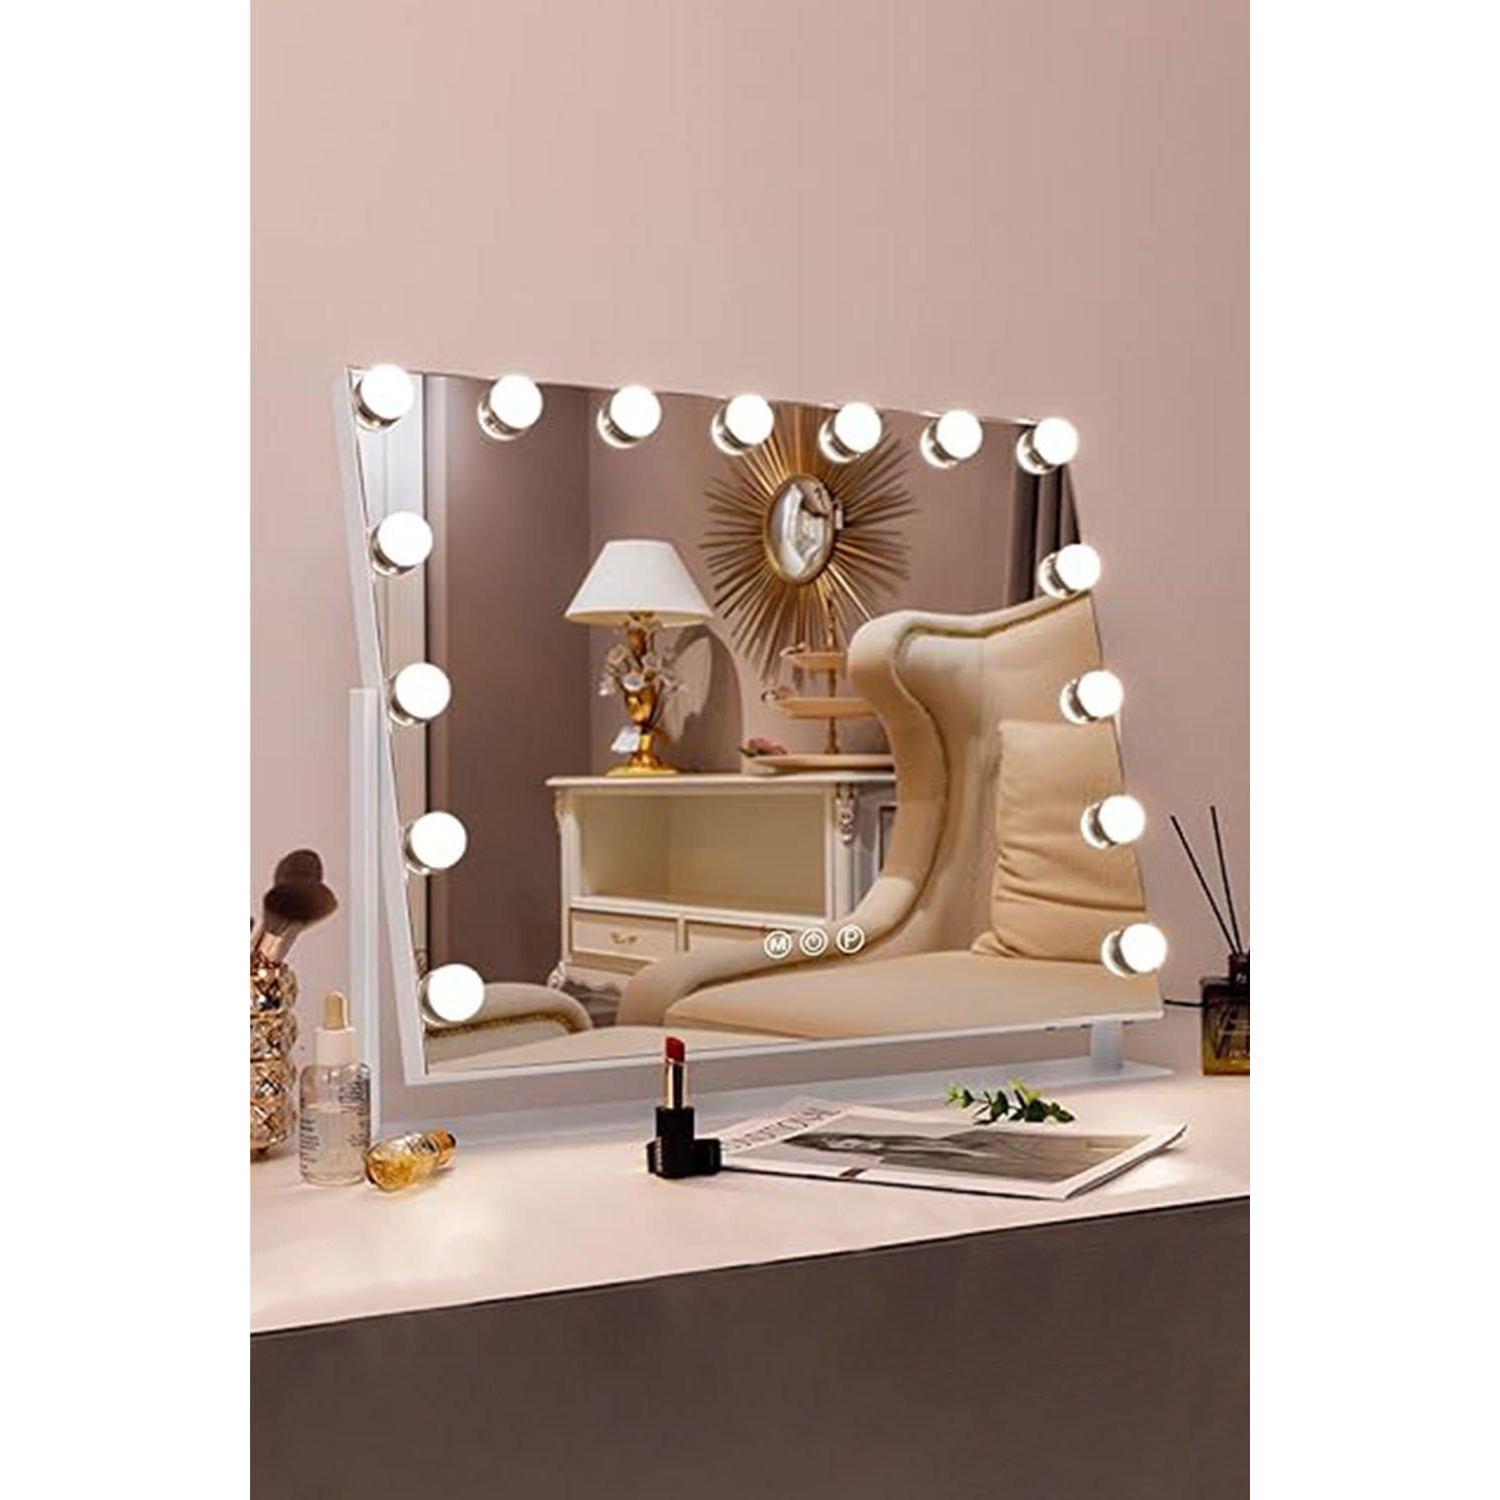 Large Hollywood Vanity Makeup Mirror with 3 Color Mode - image 1